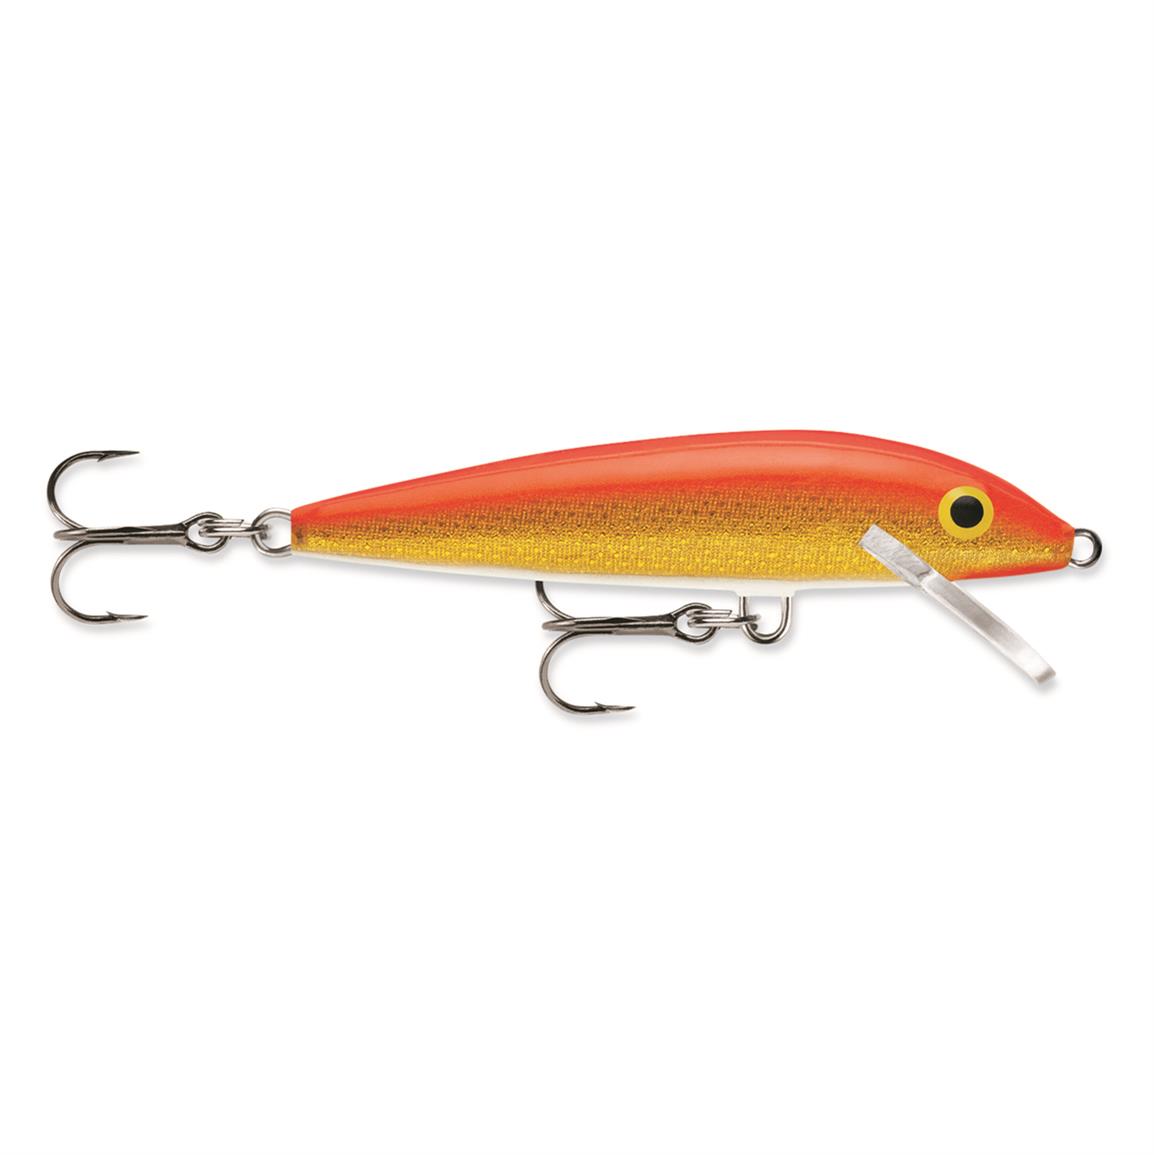 Rapala Original Floating Minnow Lure, Gold Fluorescent Red